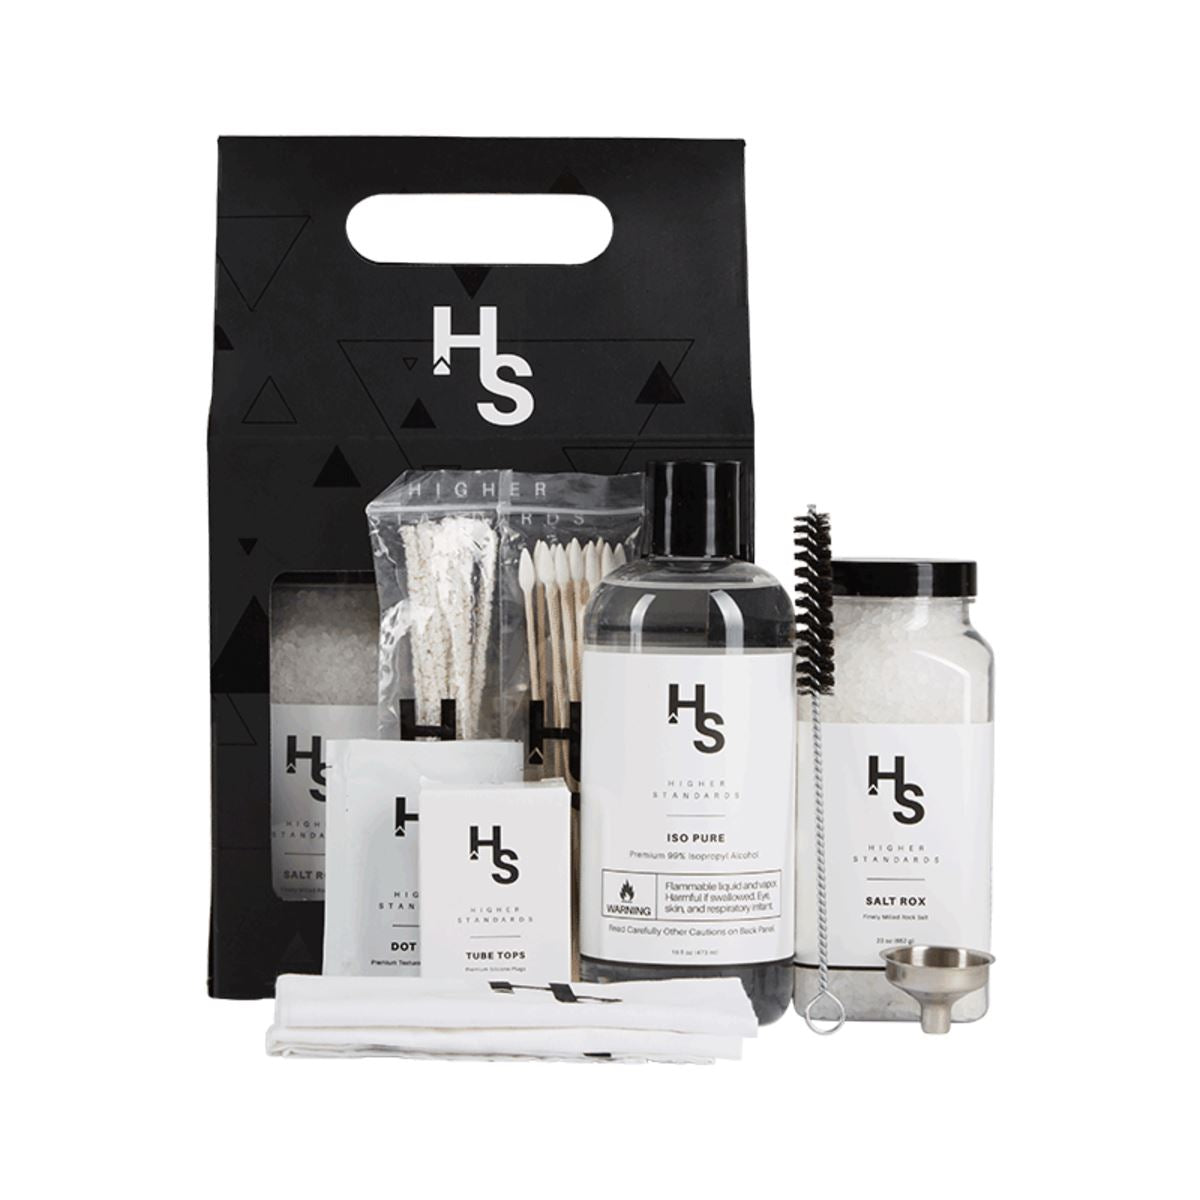 Higher Standards Supreme Clean Kit at Flower Power Packages